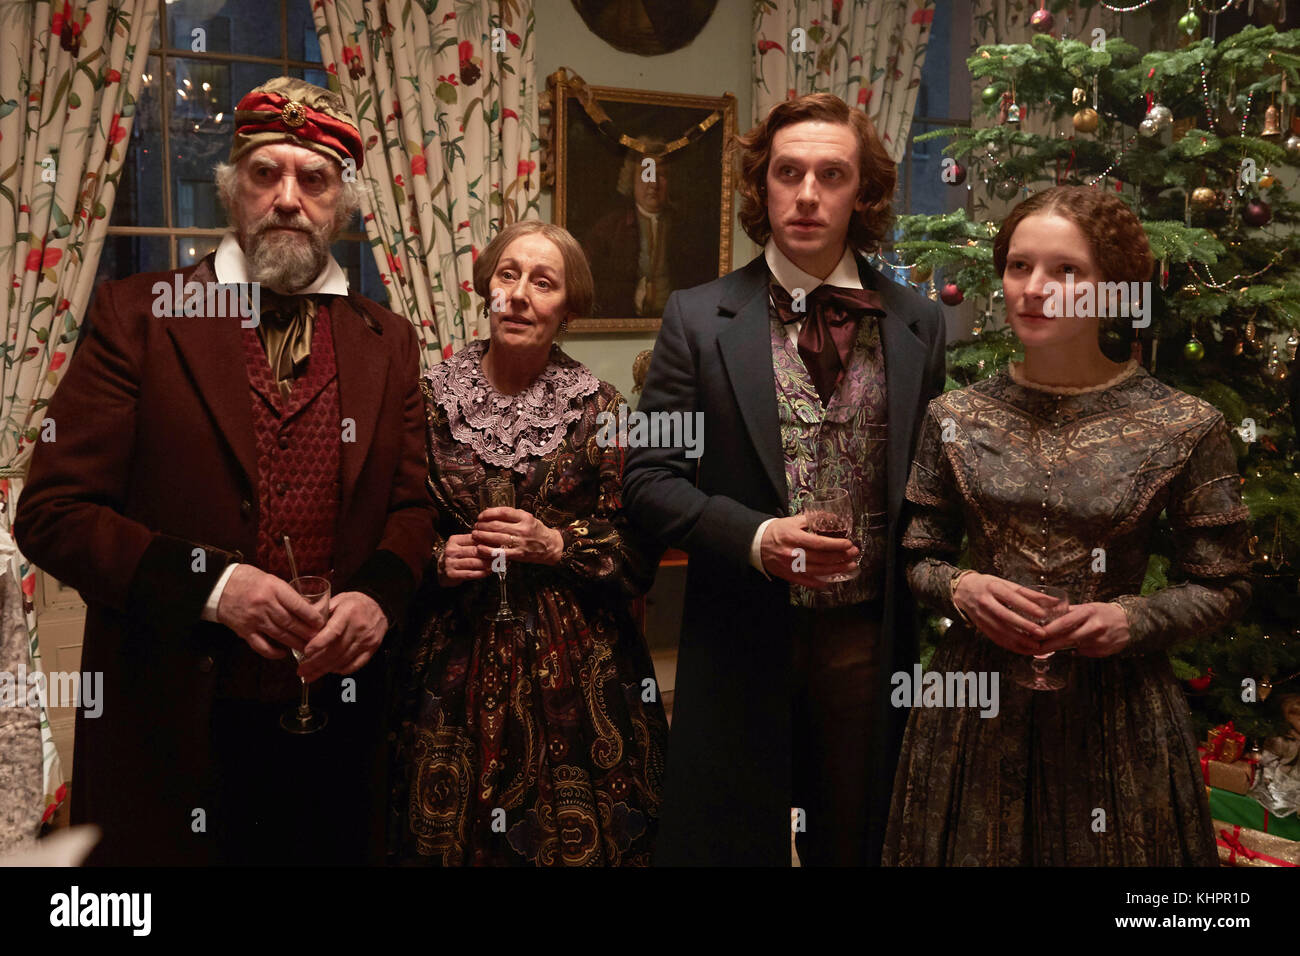 RELEASE DATE: November 22, 2017 TITLE: The Man Who Invented Christmas STUDIO: Bleecker Street Media DIRECTOR: Bharat Nalluri PLOT: The journey that led to Charles Dickens' creation of 'A Christmas Carol,' a timeless tale that would redefine the holiday. STARRING: (L to R) JONATHAN PRYCE as Mr. John Dickens, GER RYAN as Mrs. Dickens, DAN STEVENS as Charles Dickens, and MORFYDD CLARK as Kate Dickens. (Credit Image: © Bleecker Street Media/Entertainment Pictures) Stock Photo